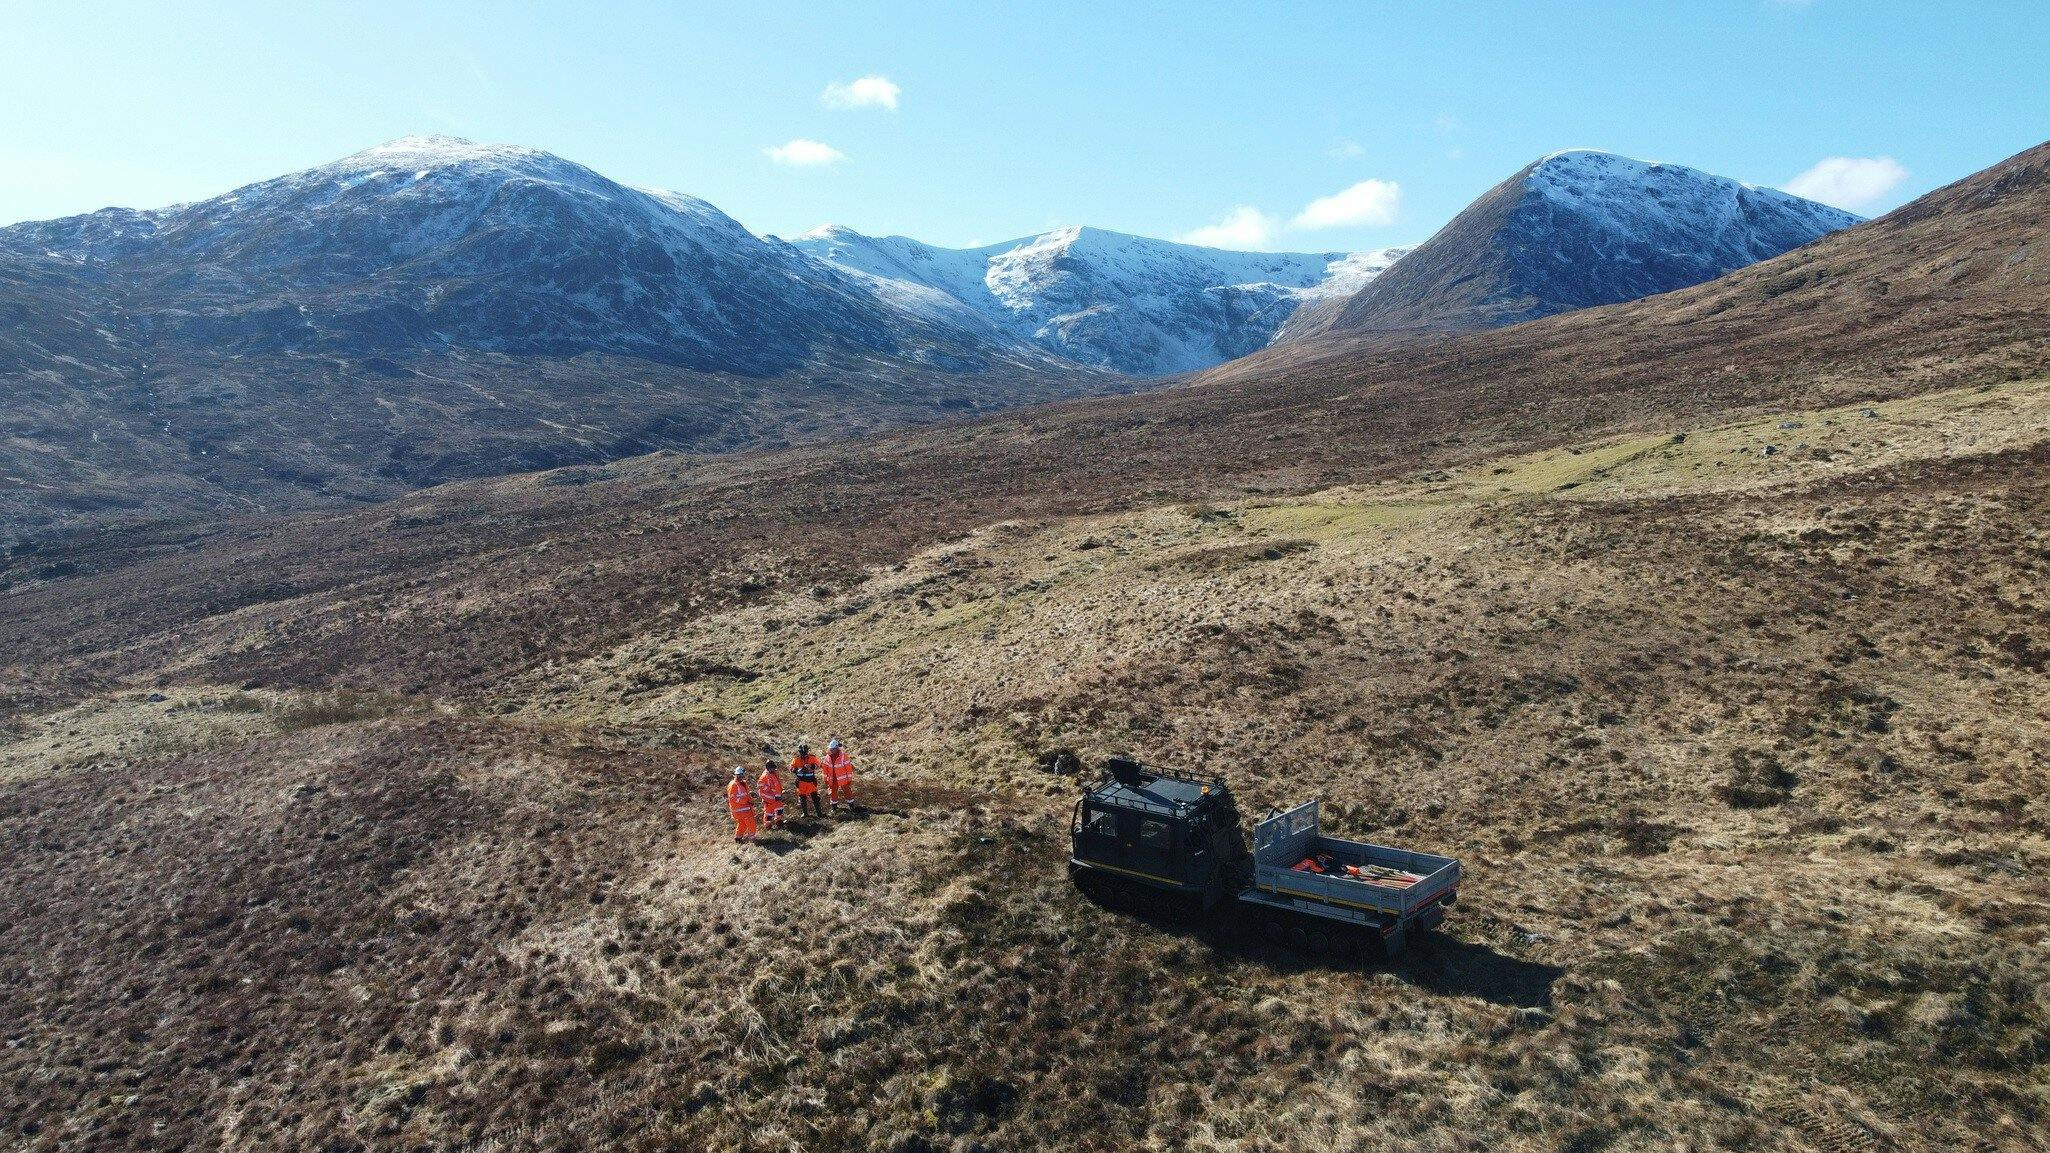 Content from the Coire Glas hydro pumped storage scheme in Scotland, UK as part of a Ground Investigation project for LSC.